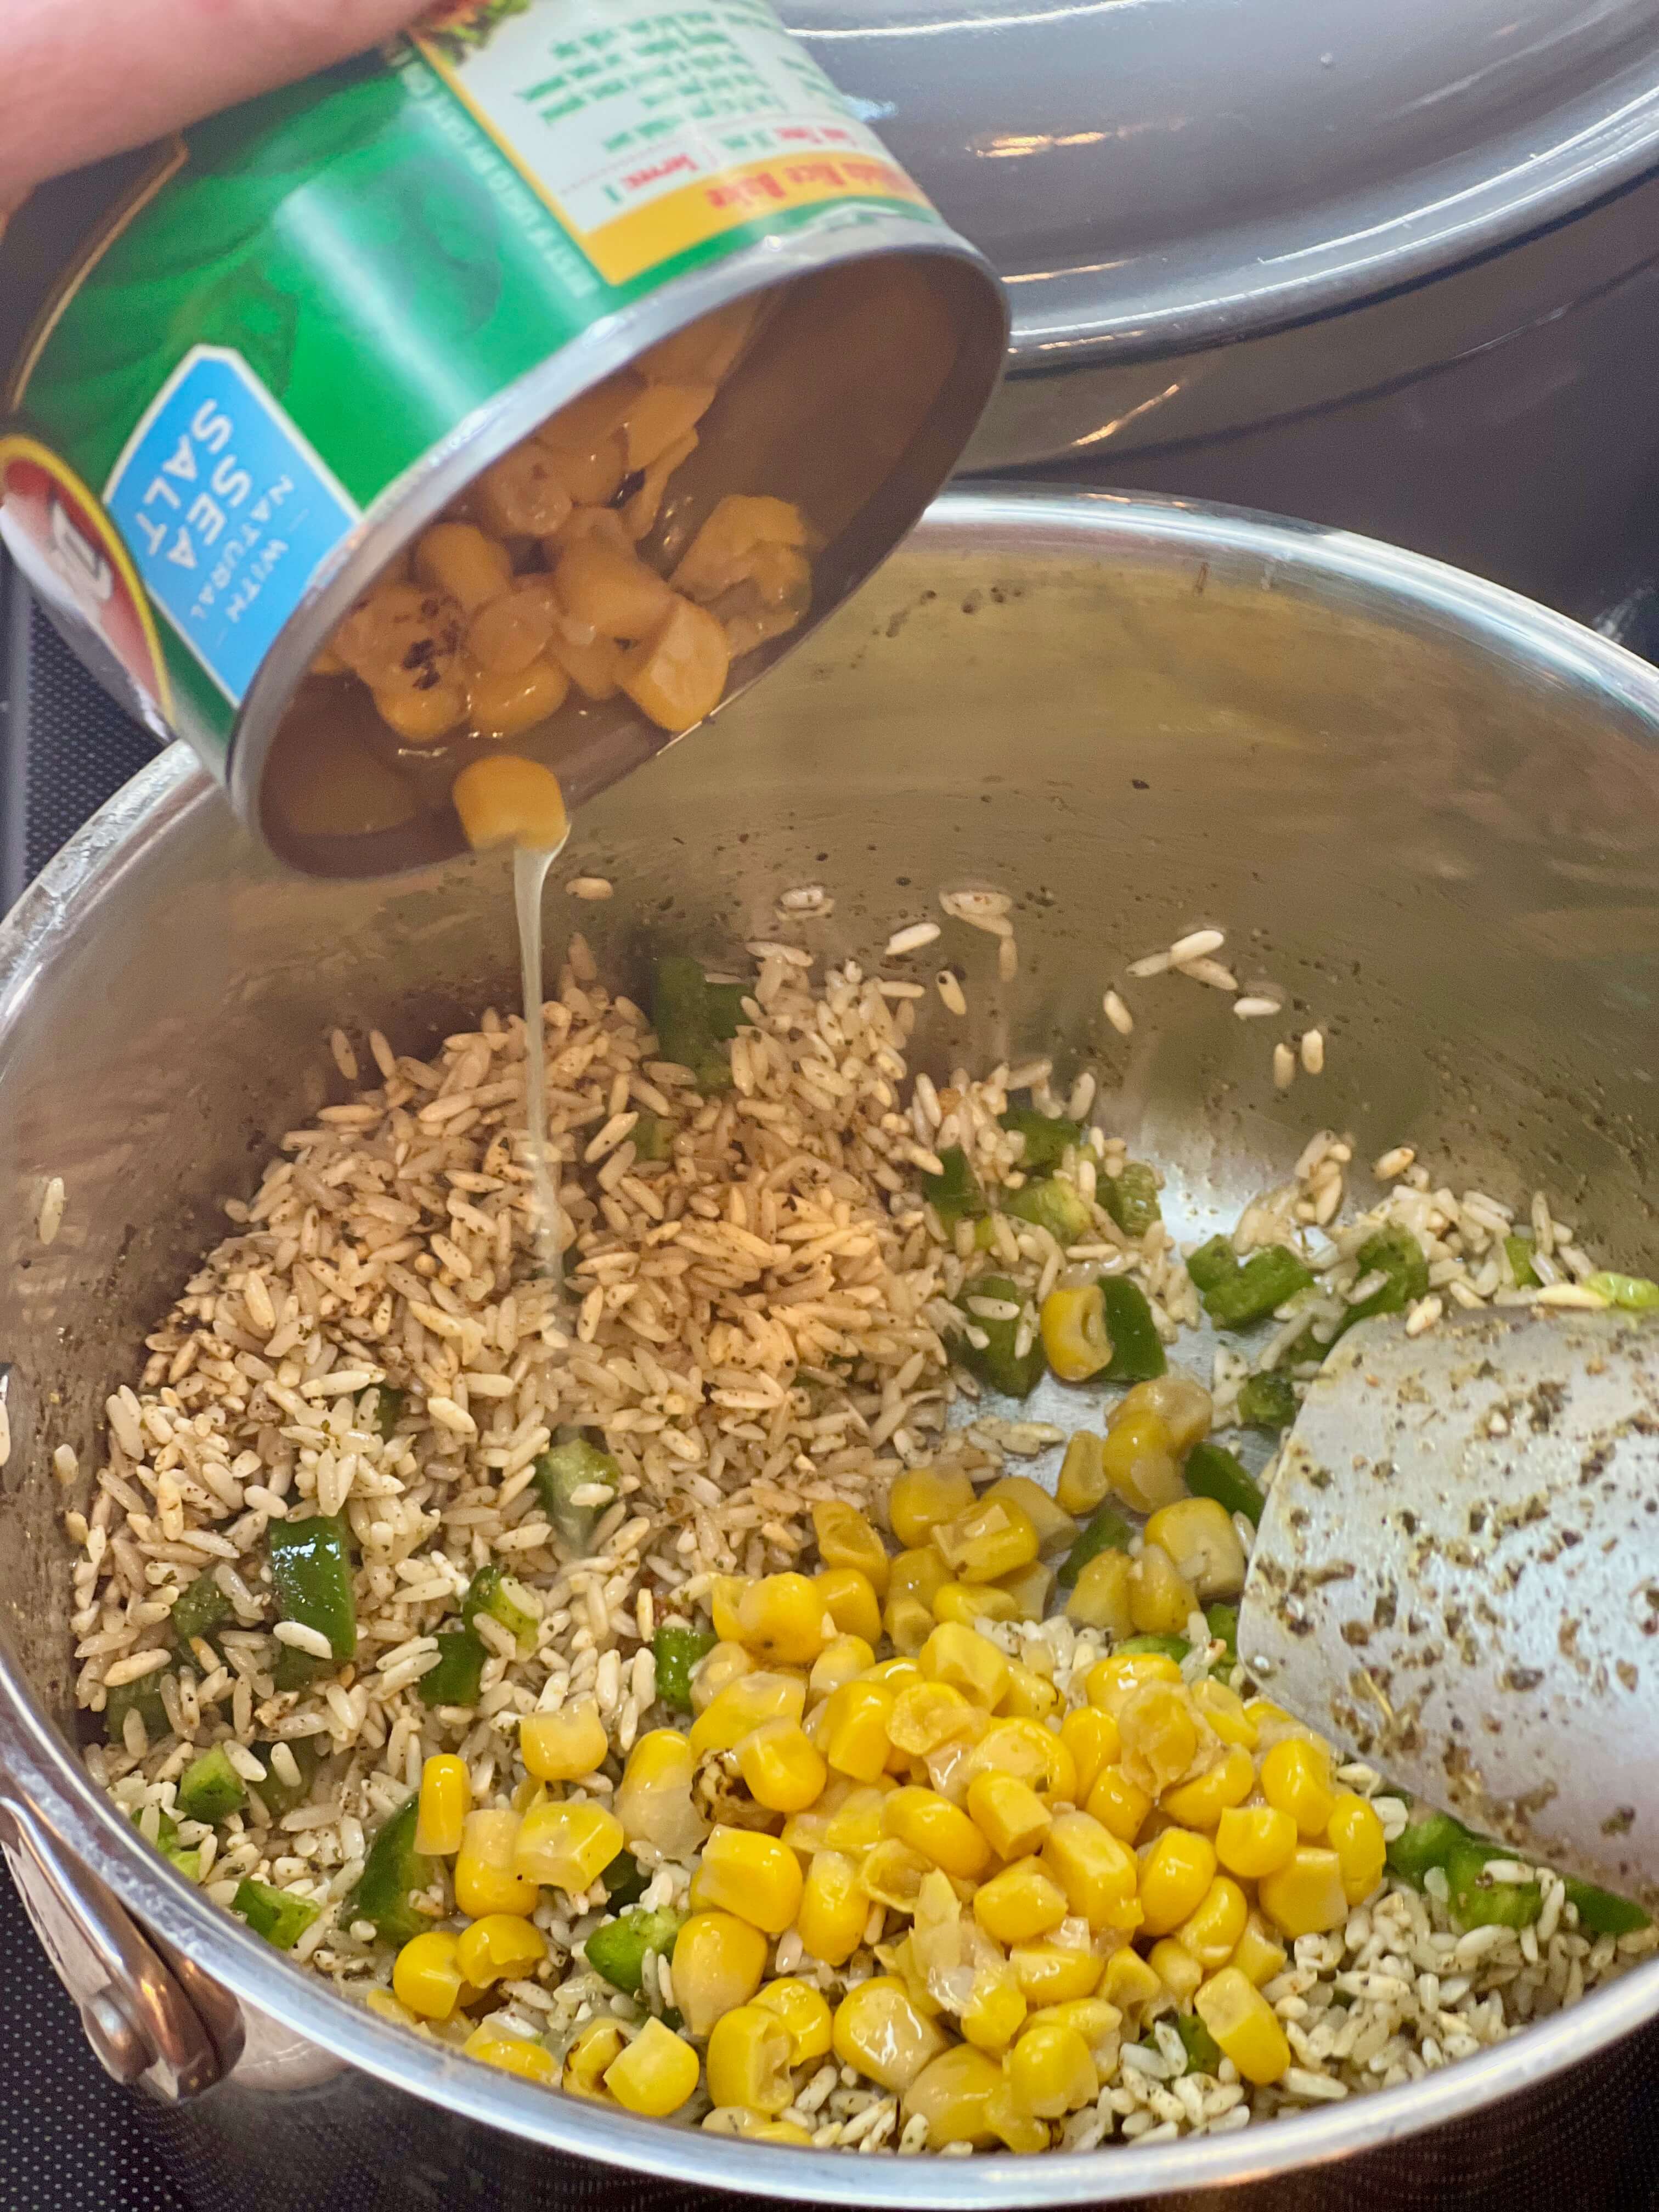 Add the corn and green chiles for the Southwest rice